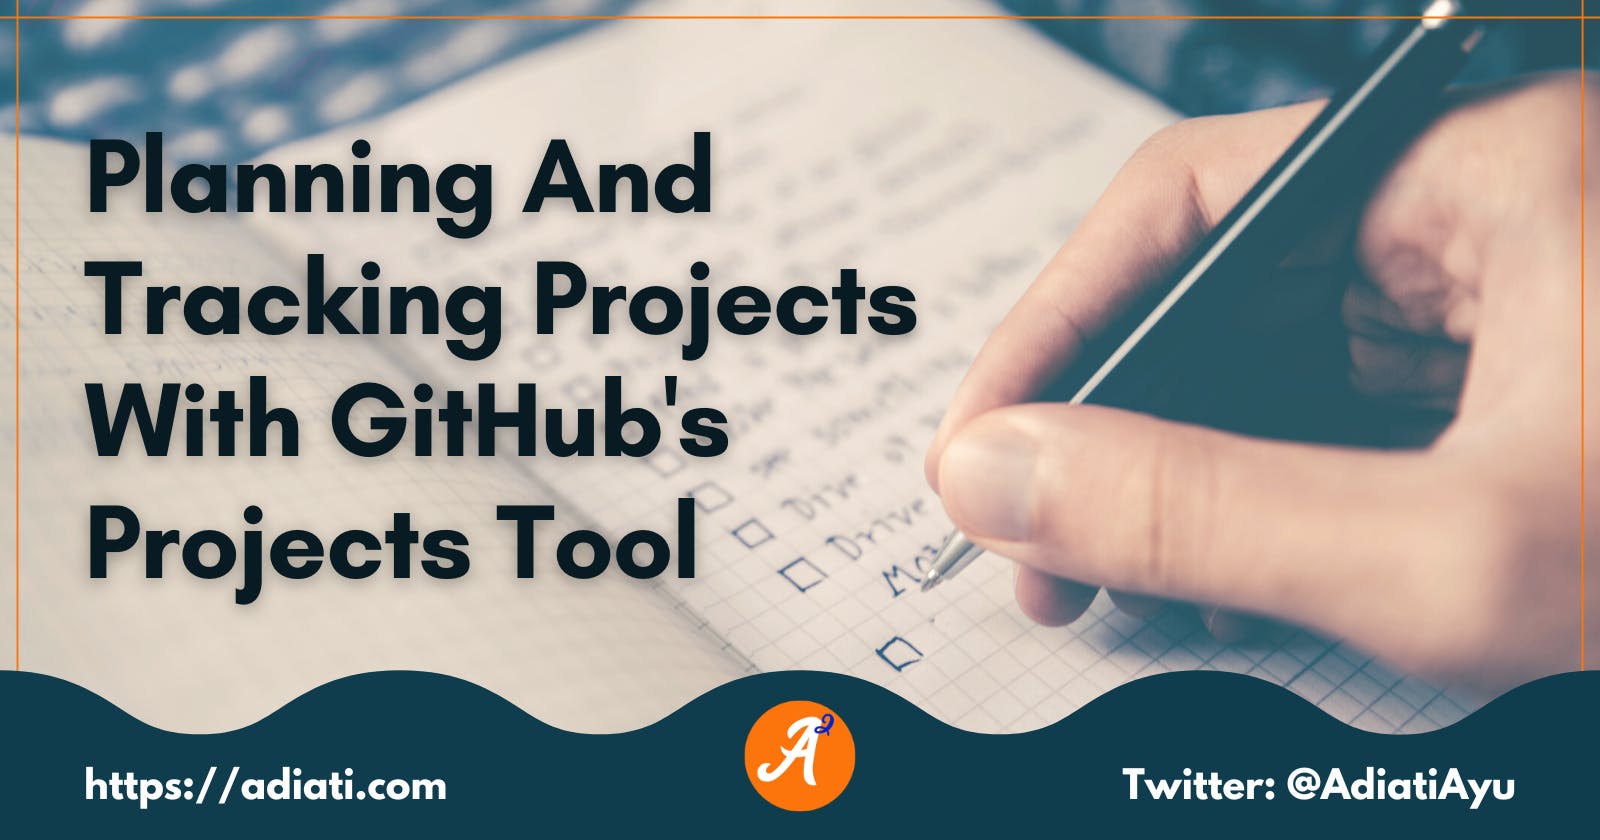 Planning And Tracking Projects With GitHub's Projects Tool